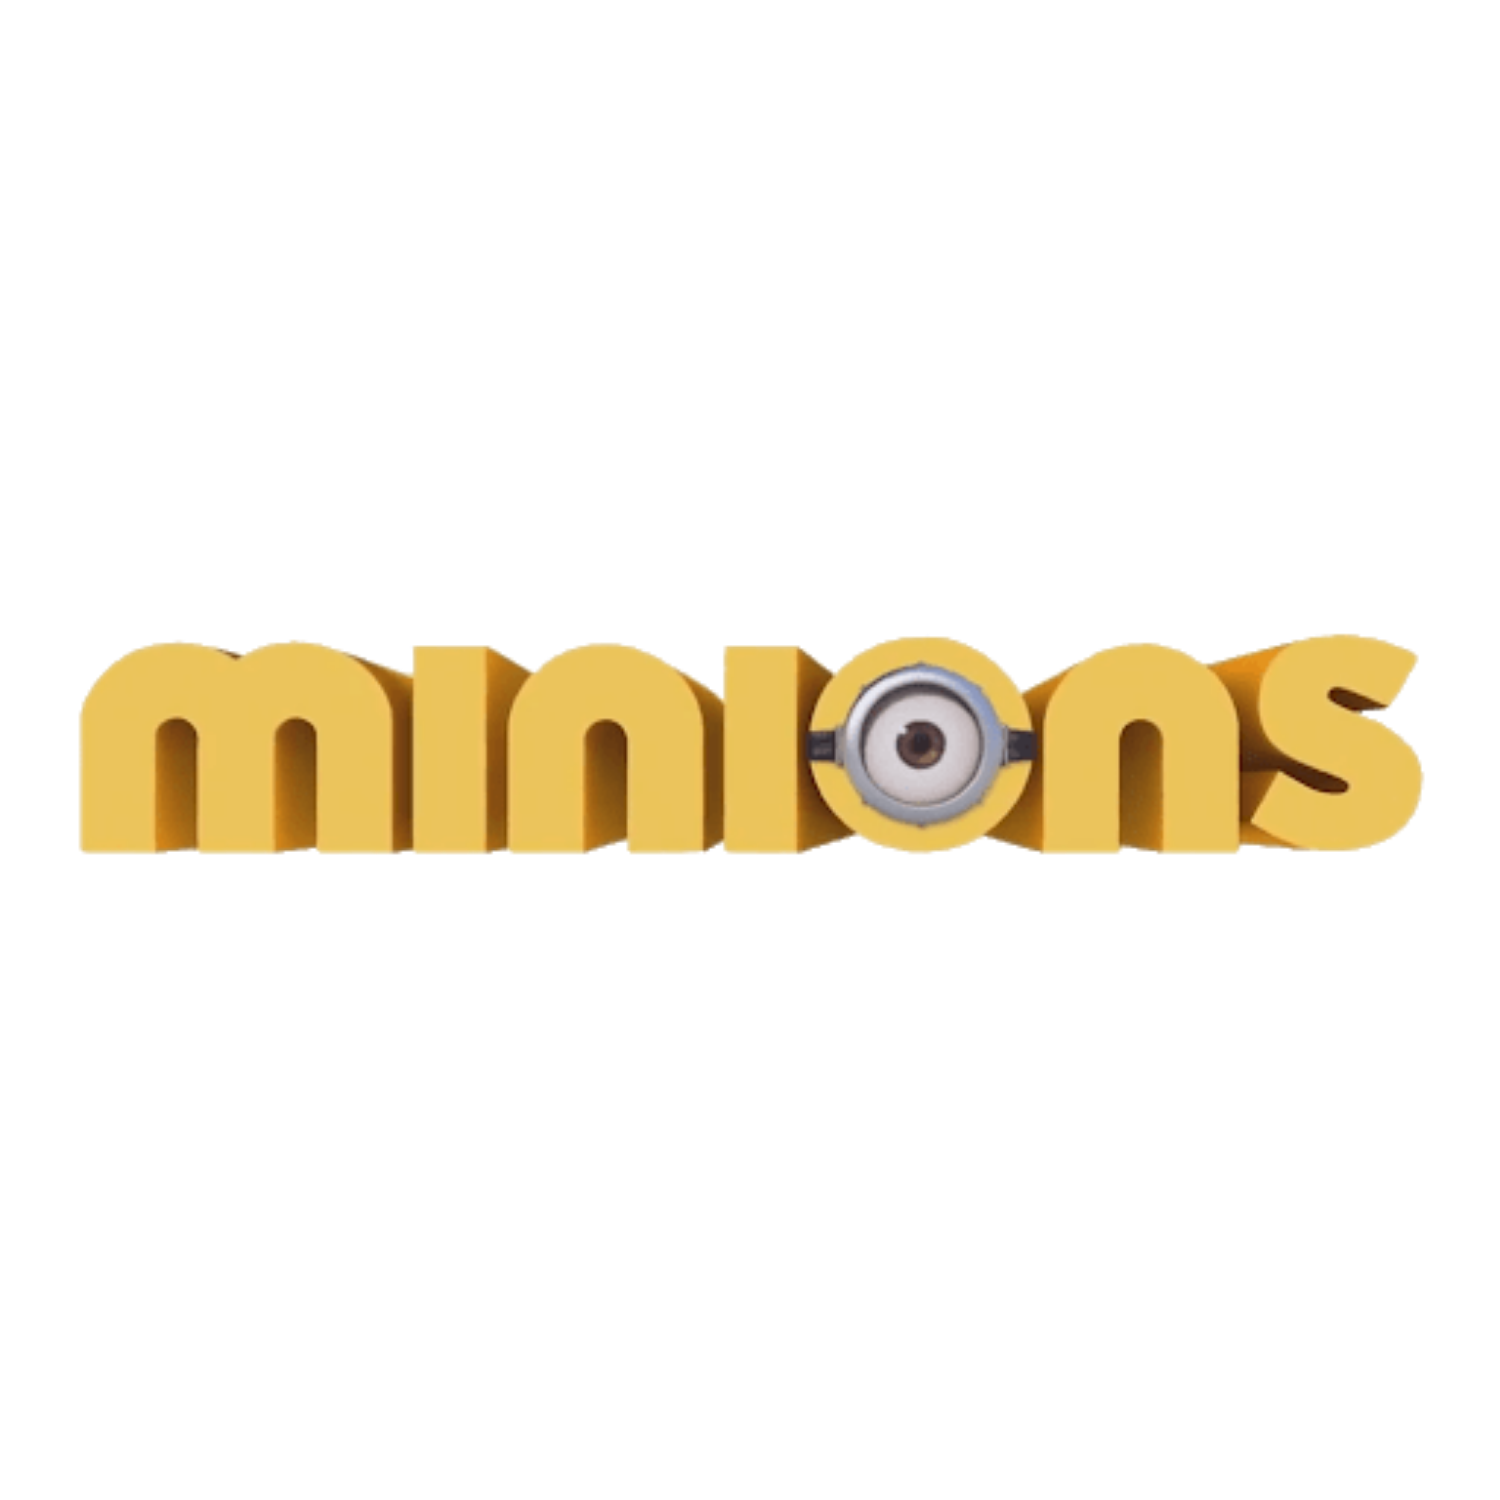 Shop Minions products